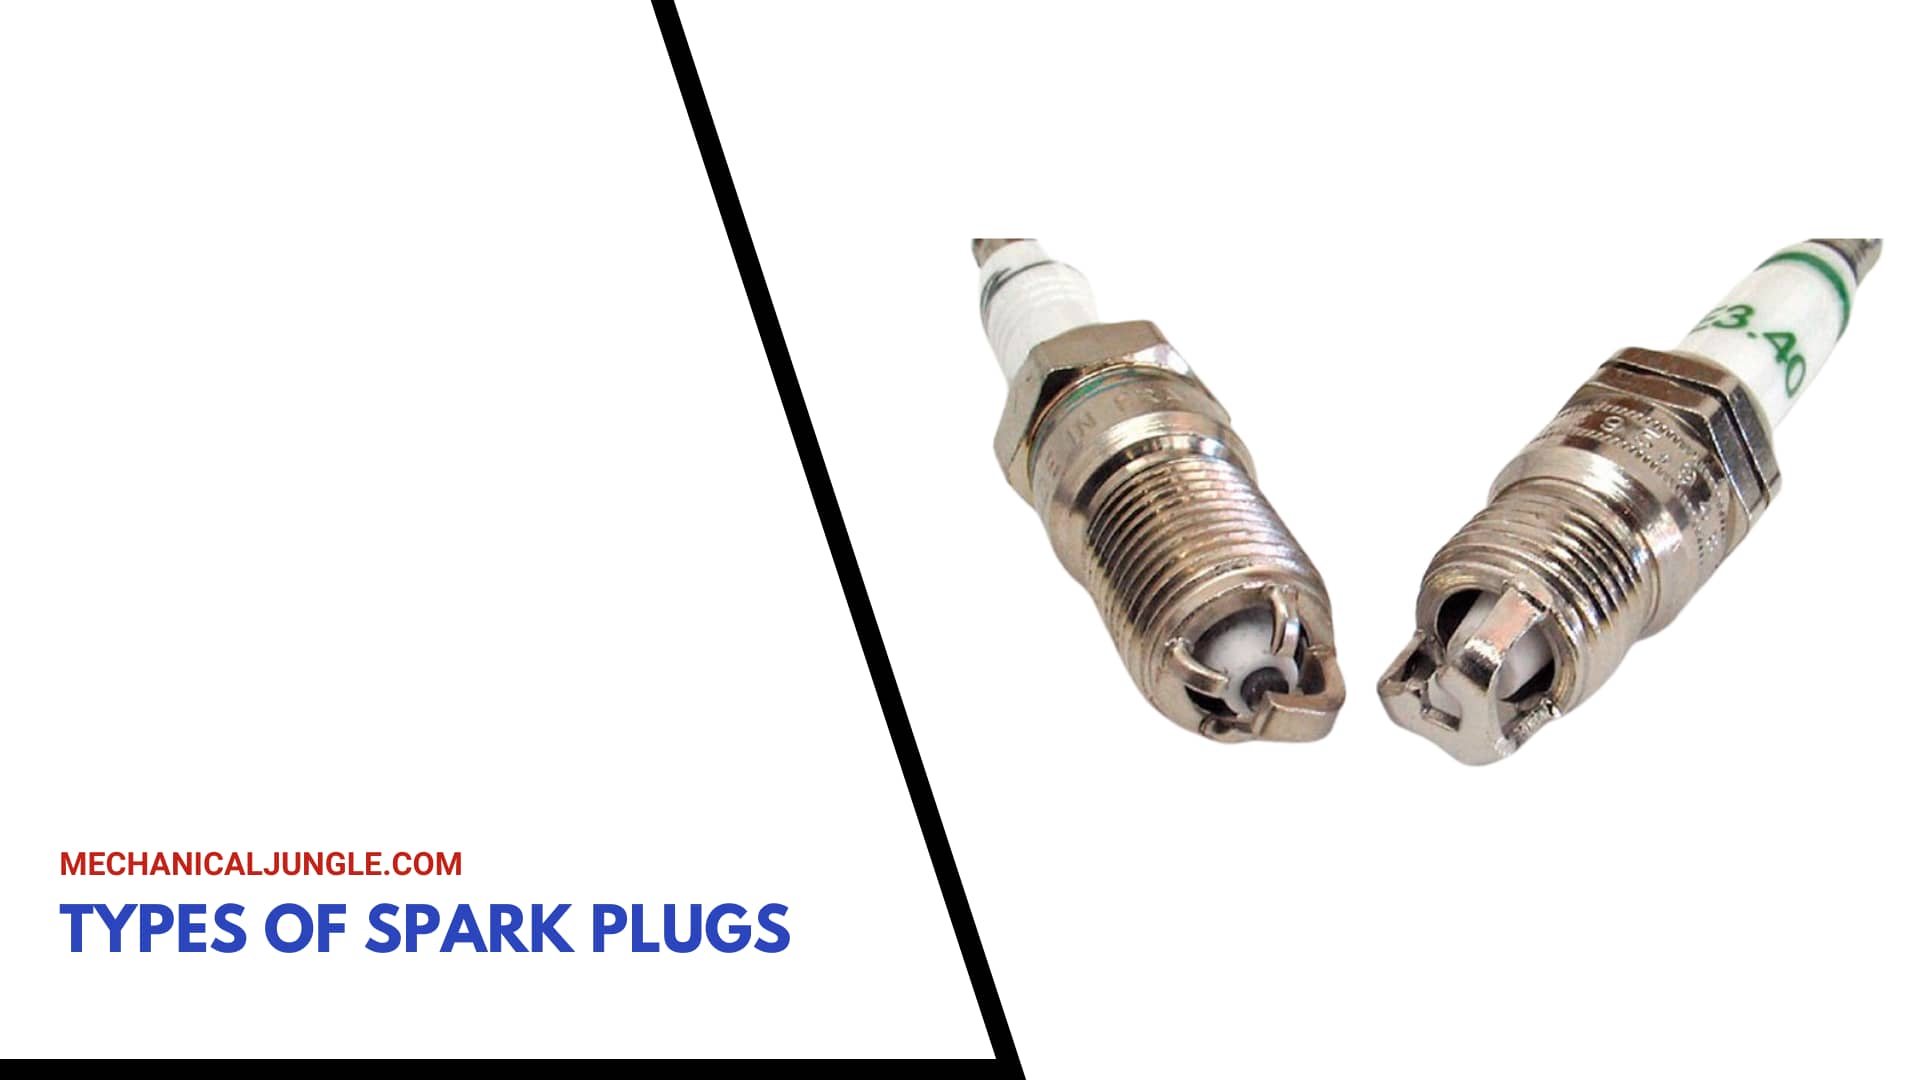 Types of Spark Plugs